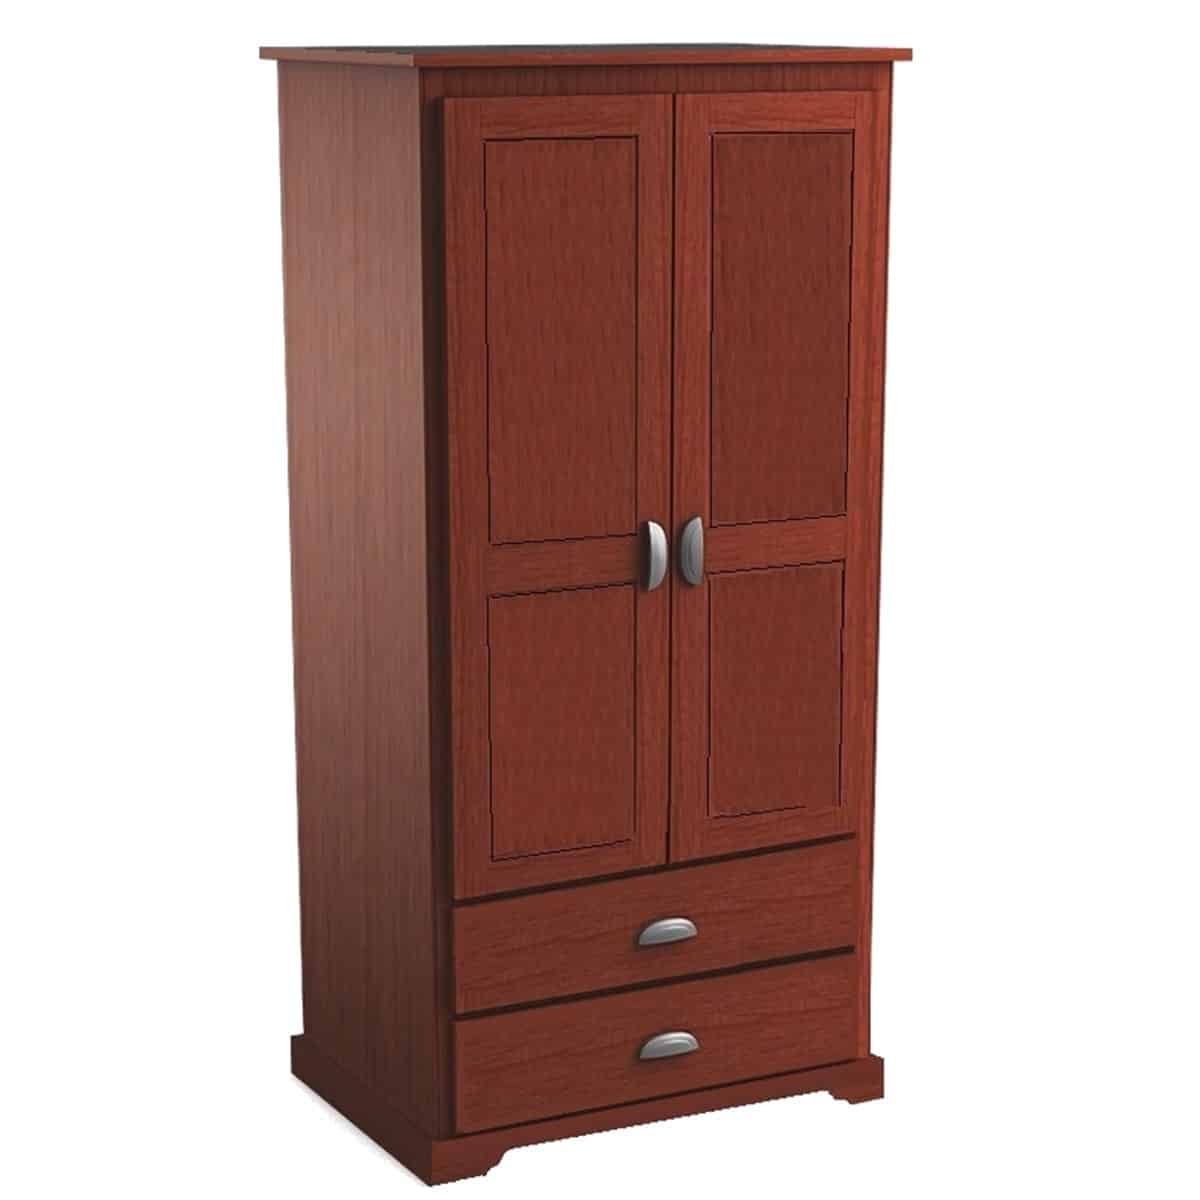 Kirkwood: Double Wardrobe with Two Drawers